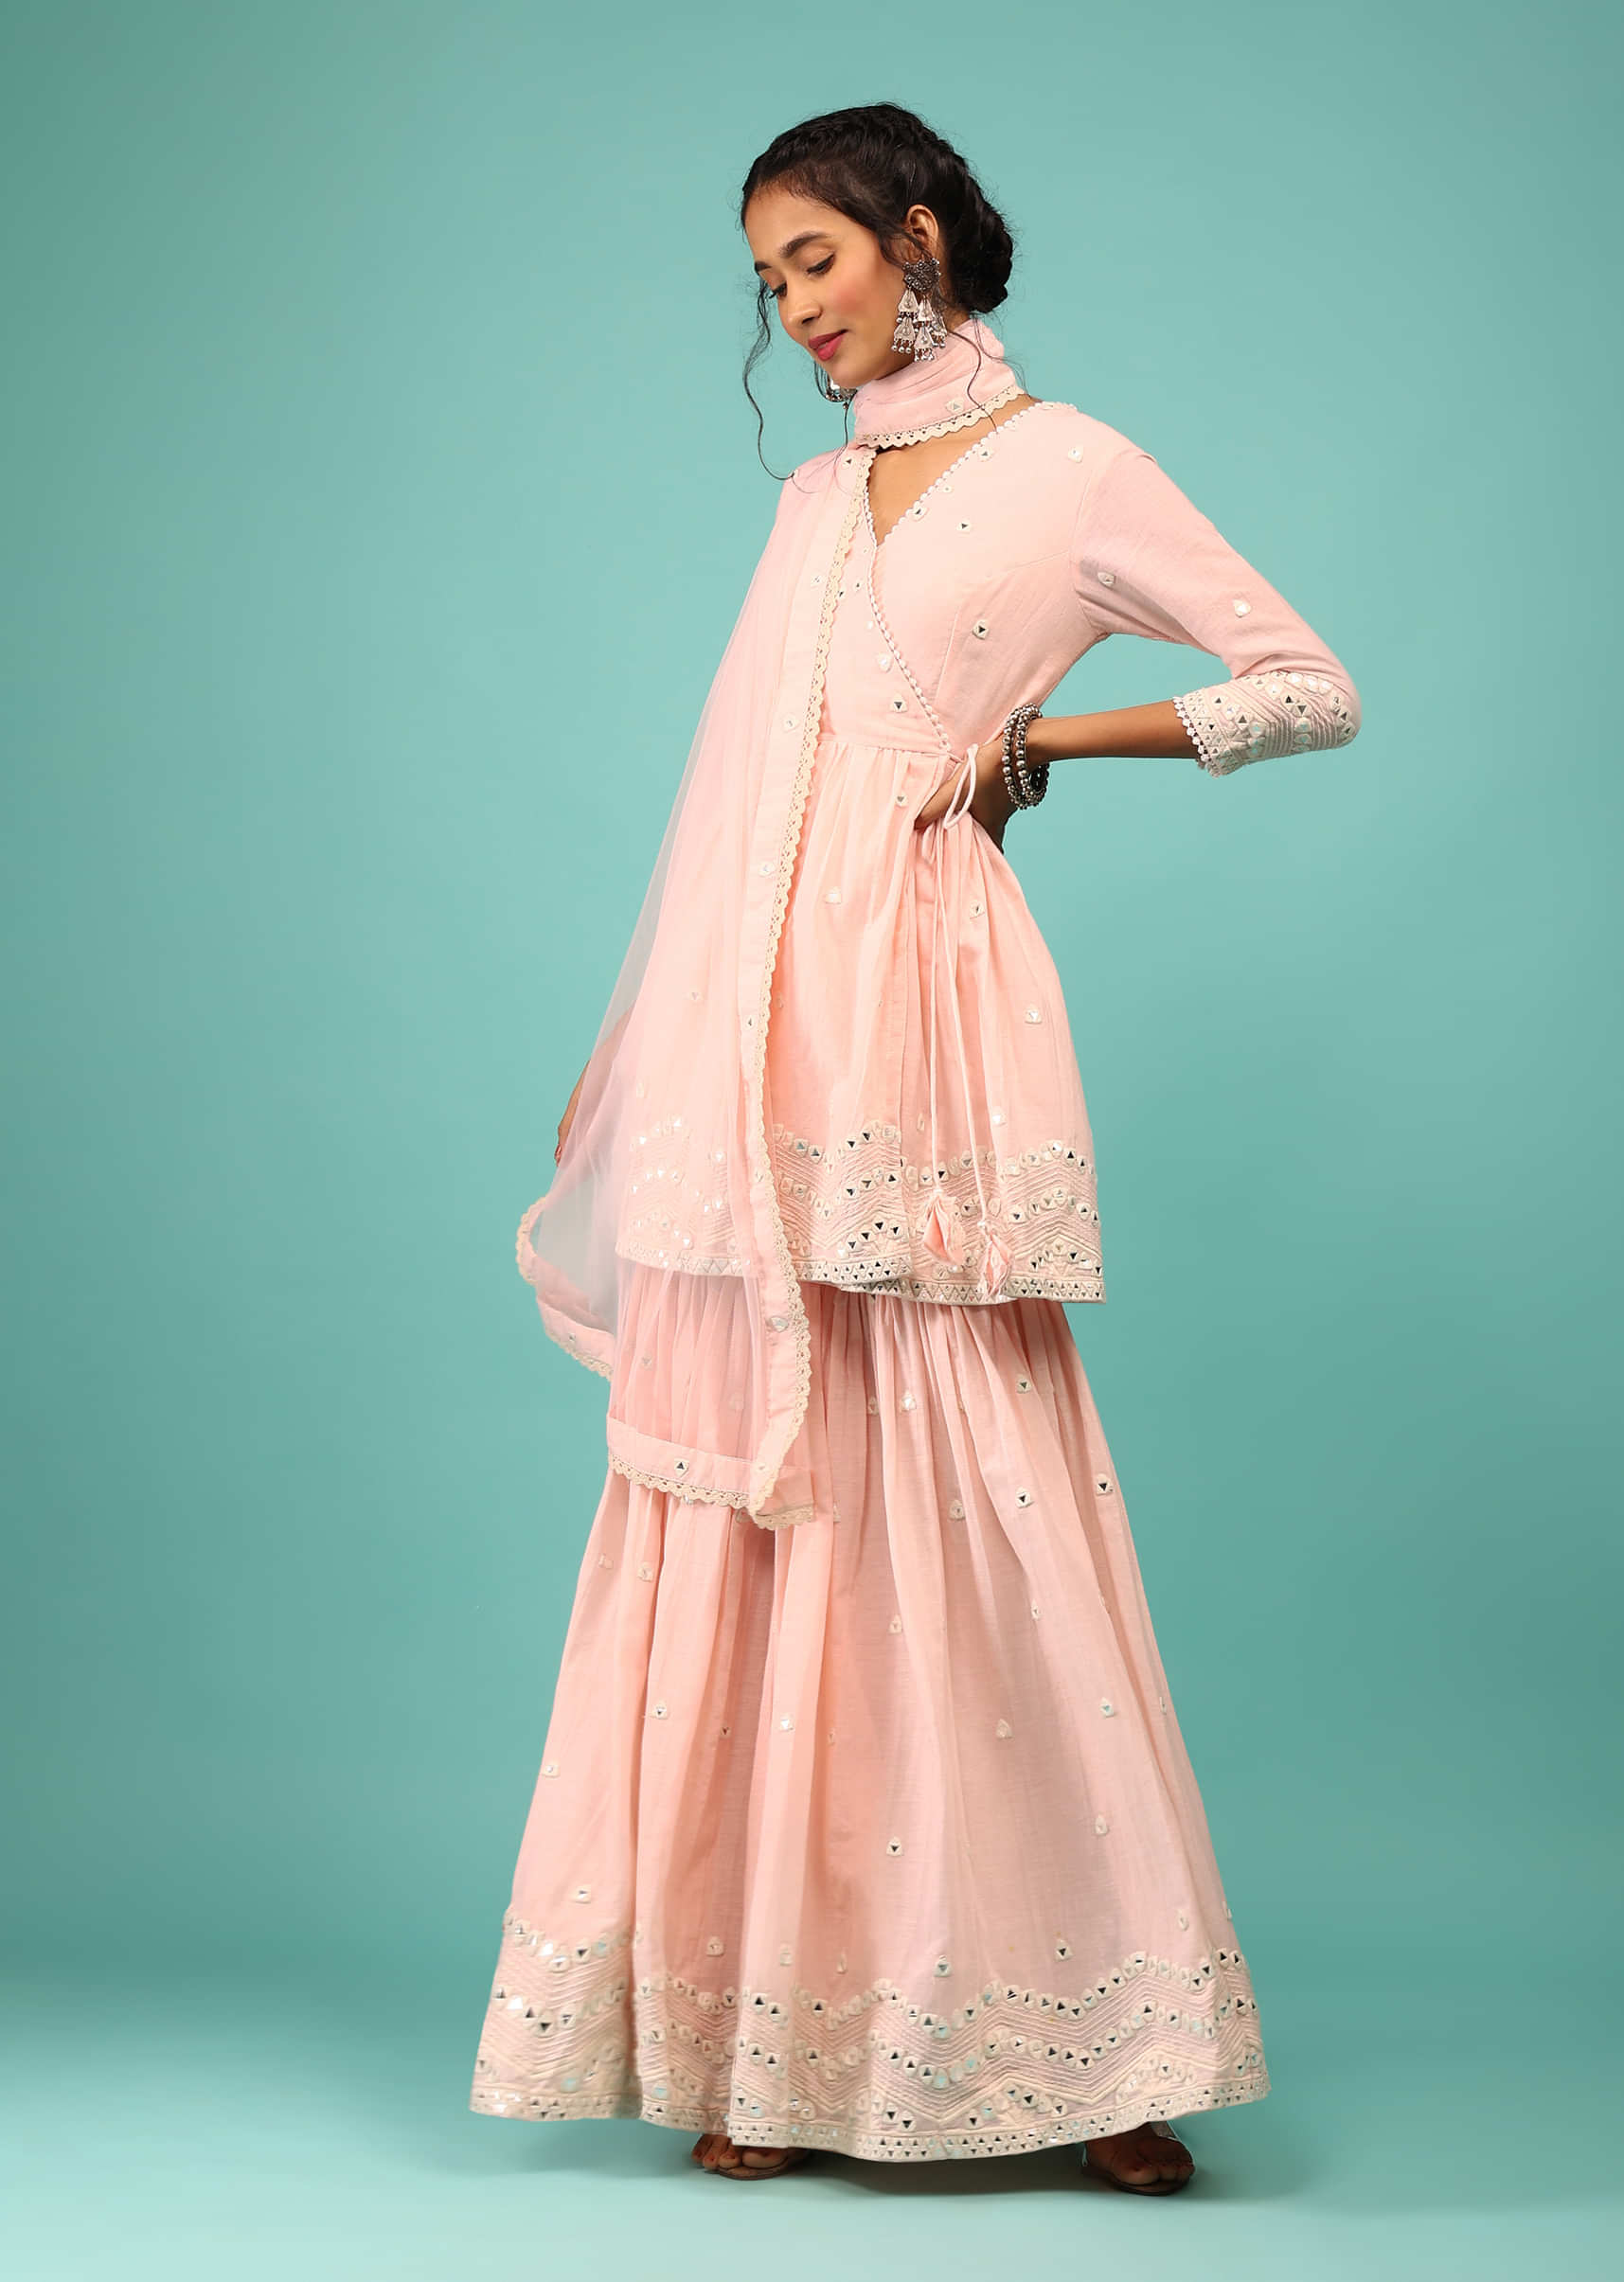 Cloud Pink Sharara Suit In Cotton With Lucknowi Geometric Embroidery & Angarakha Peplum Top